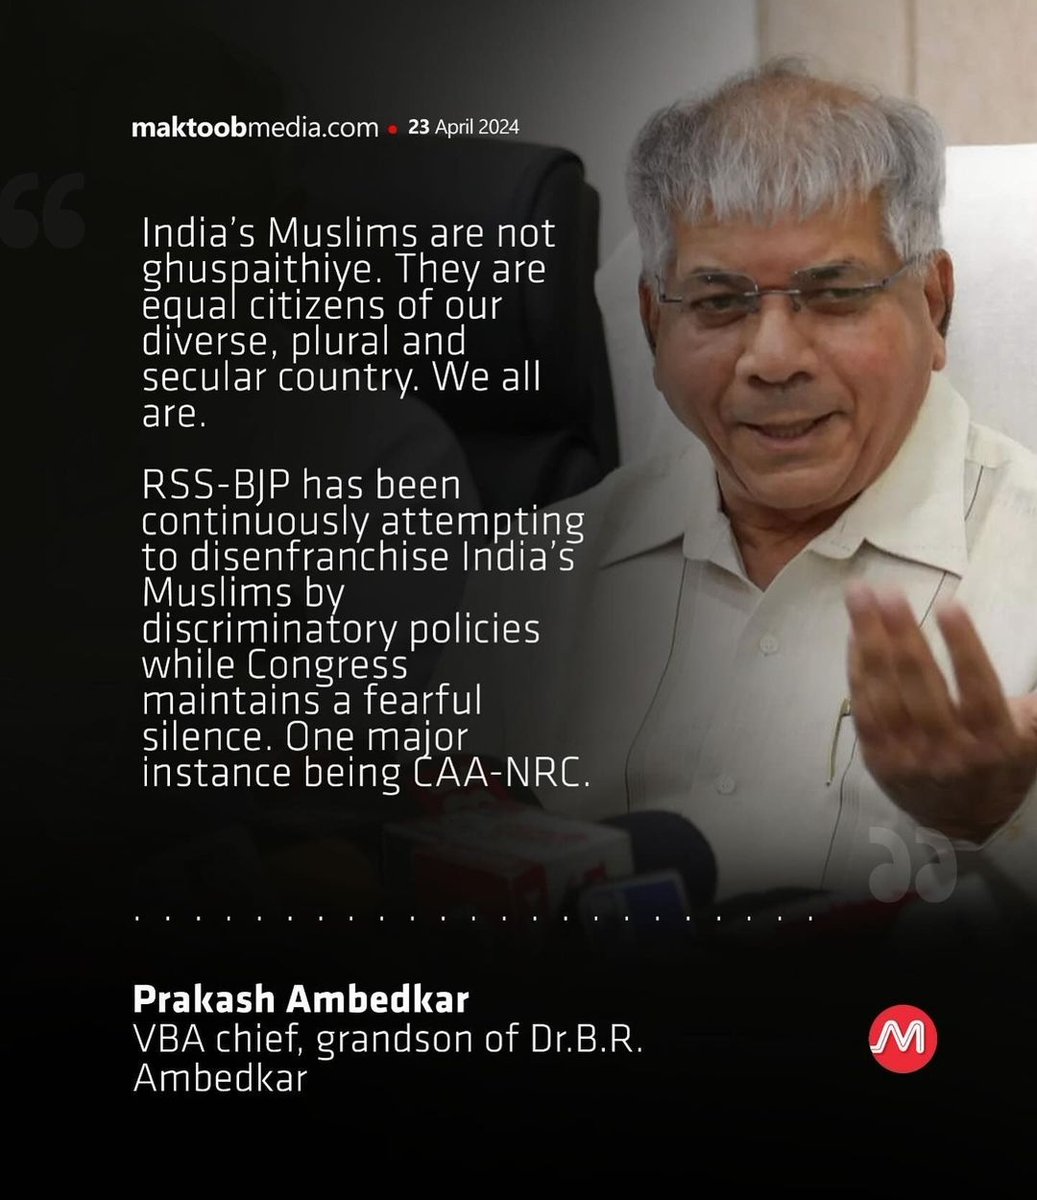 'Indian Muslims are not ghuspaithiye, they are equal citizen of our diverse' 

Prakash Ambedkar on Modi's hate speech targeting Muslim community.